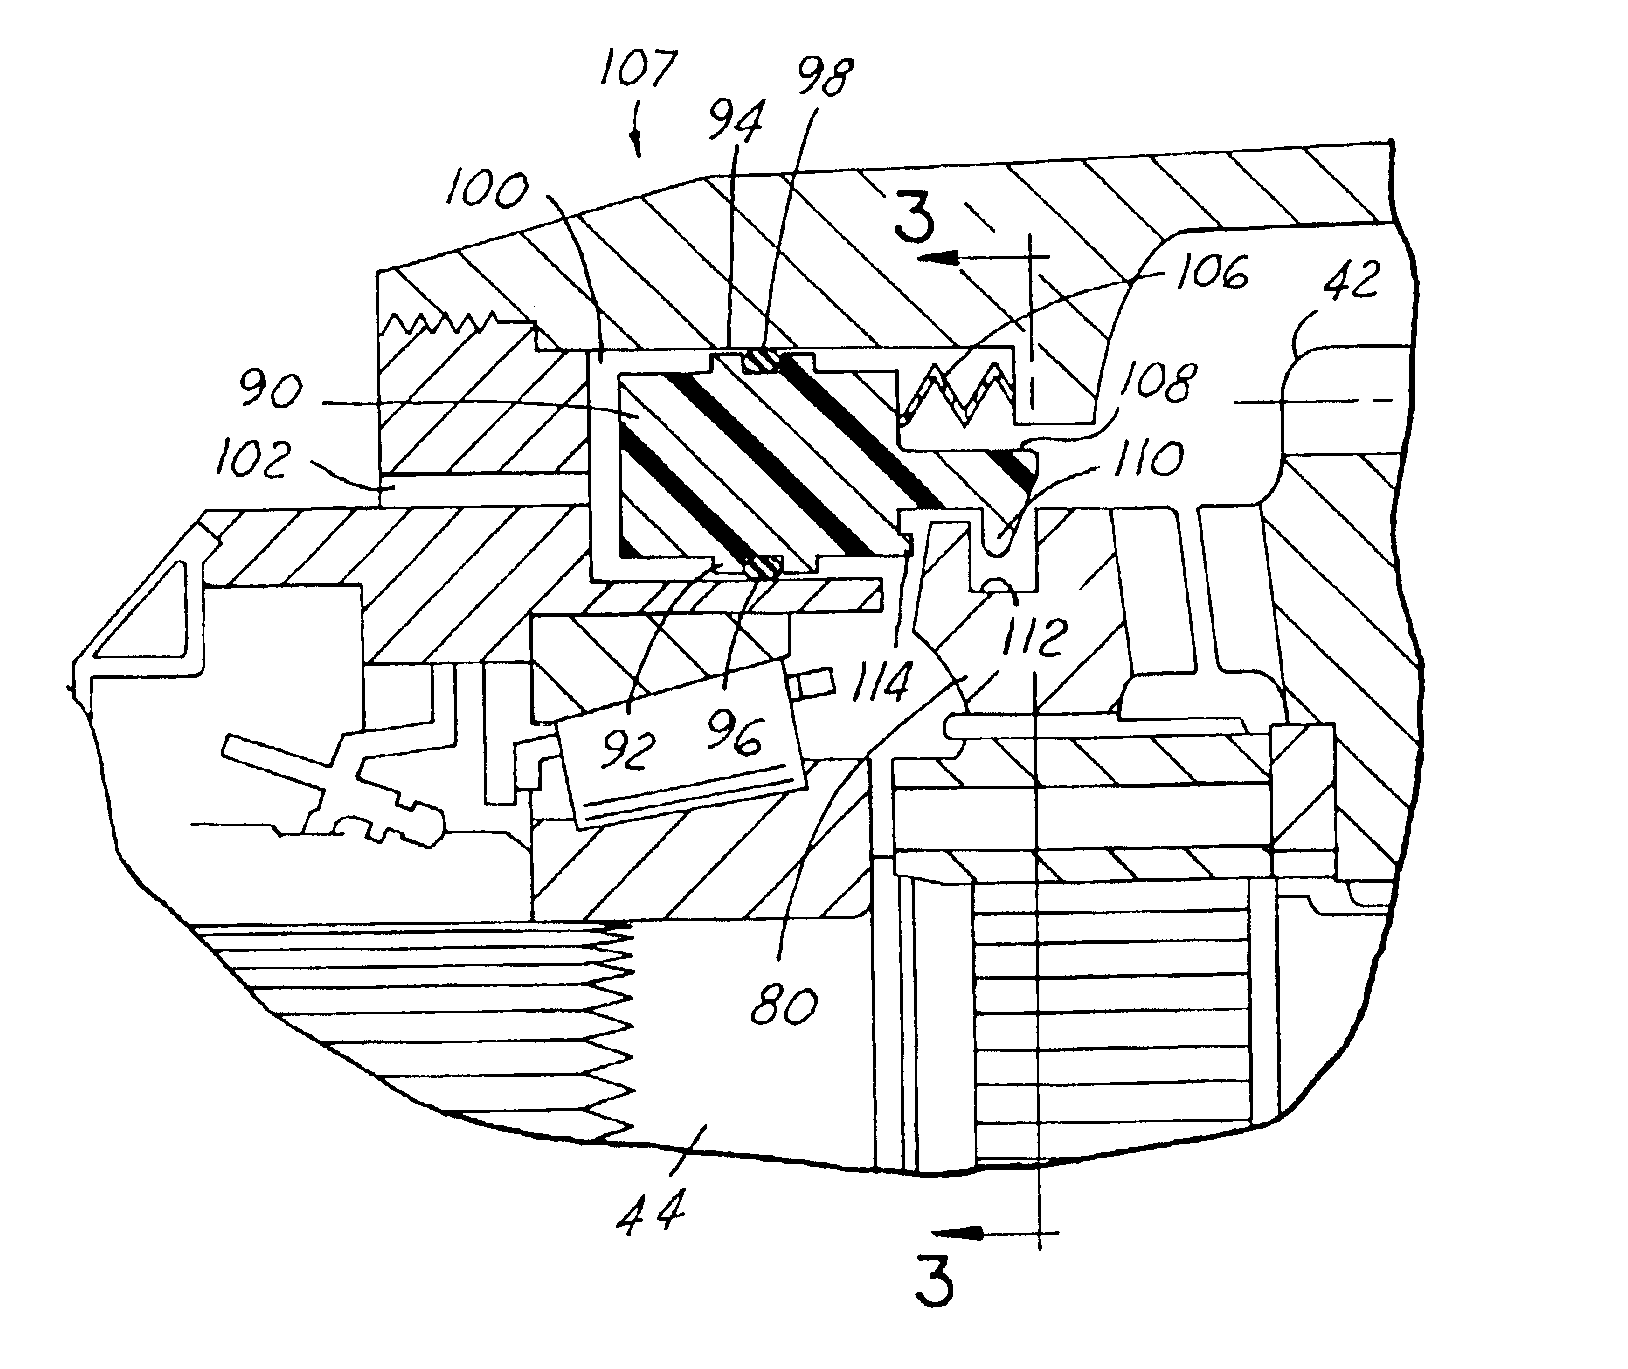 Concentric shift system for engaging an interaxle differential lock